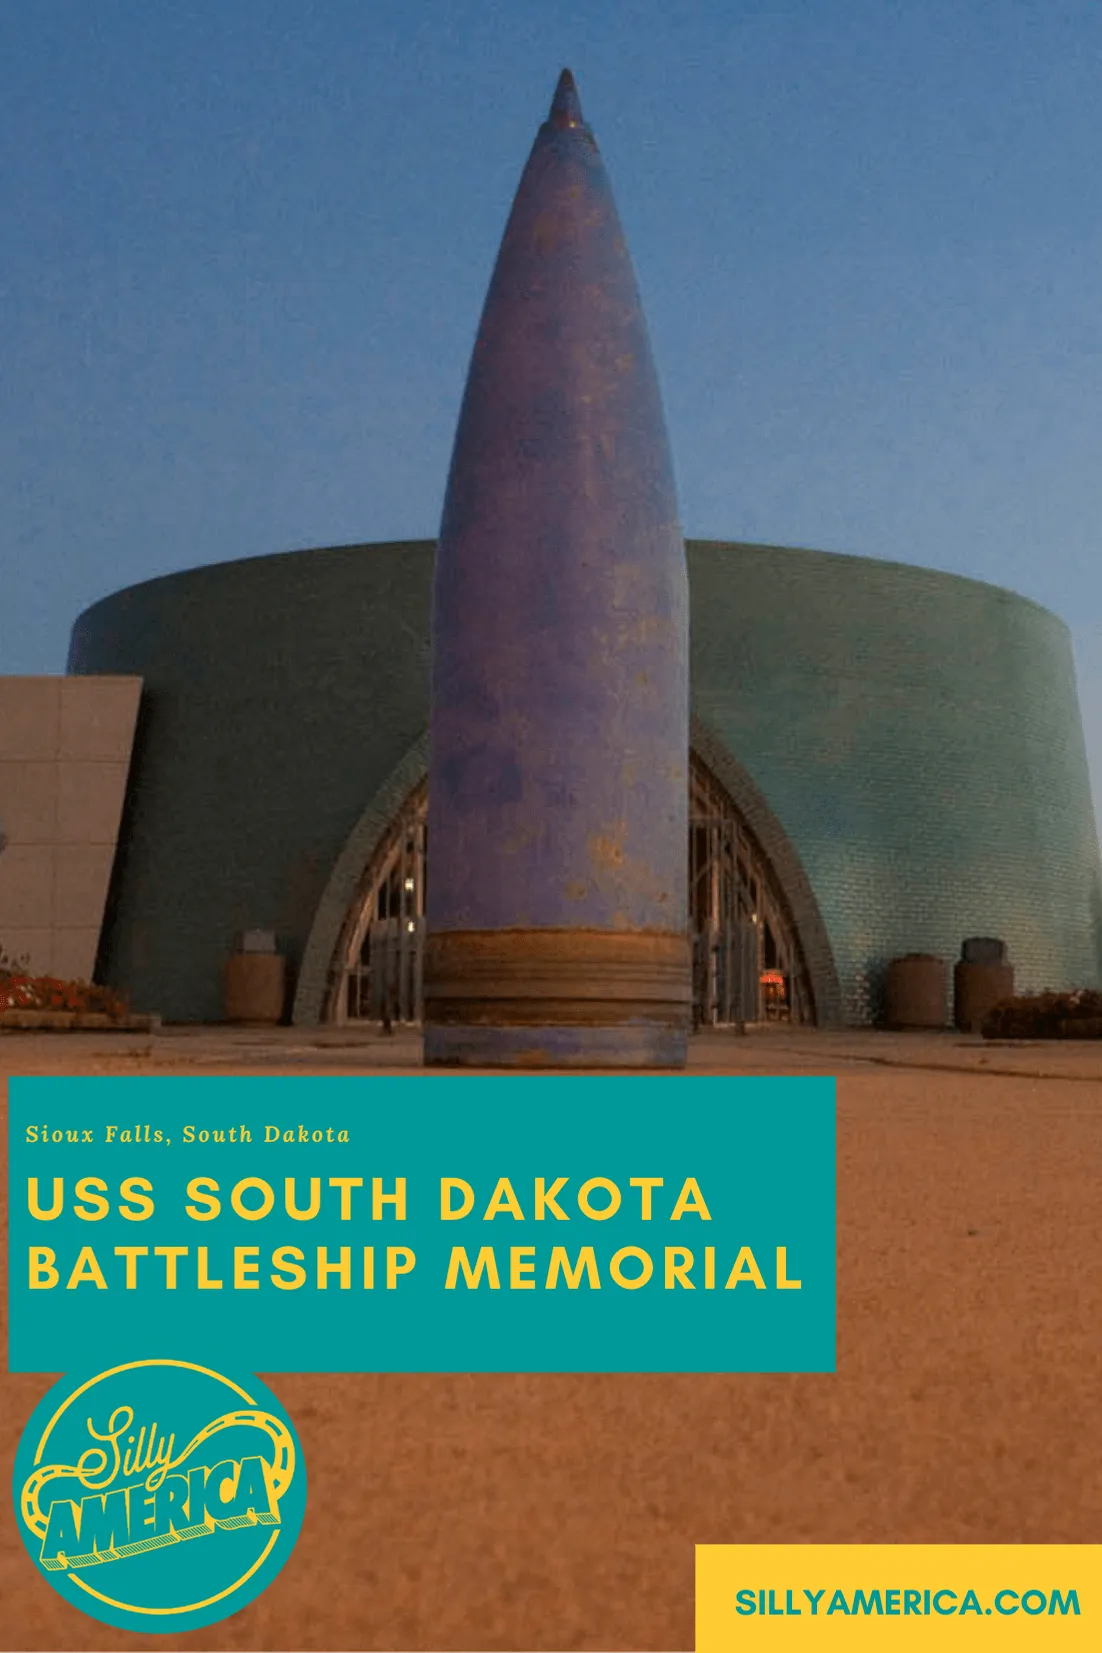 The USS South Dakota Battleship Memorial in Sioux Falls, South Dakota features a full-sized concrete outline of USS South Dakota. Visit this South Dakota roadside attraction on a road trip. #SouthDakotaRoadsideAttractions #SouthDakotaRoadsideAttraction #RoadsideAttractions #RoadsideAttraction #RoadTrip #SouthDakotaRoadTrip #ThingsToDoInSouthDakota #SouthDakotaRoadTripItinerary #SouthDakotaBucketList #SouthDakotaSummerRoadTrip #SouthDakotaRoadTripIdeas #SouthDakotaAwesomeRoadTrip